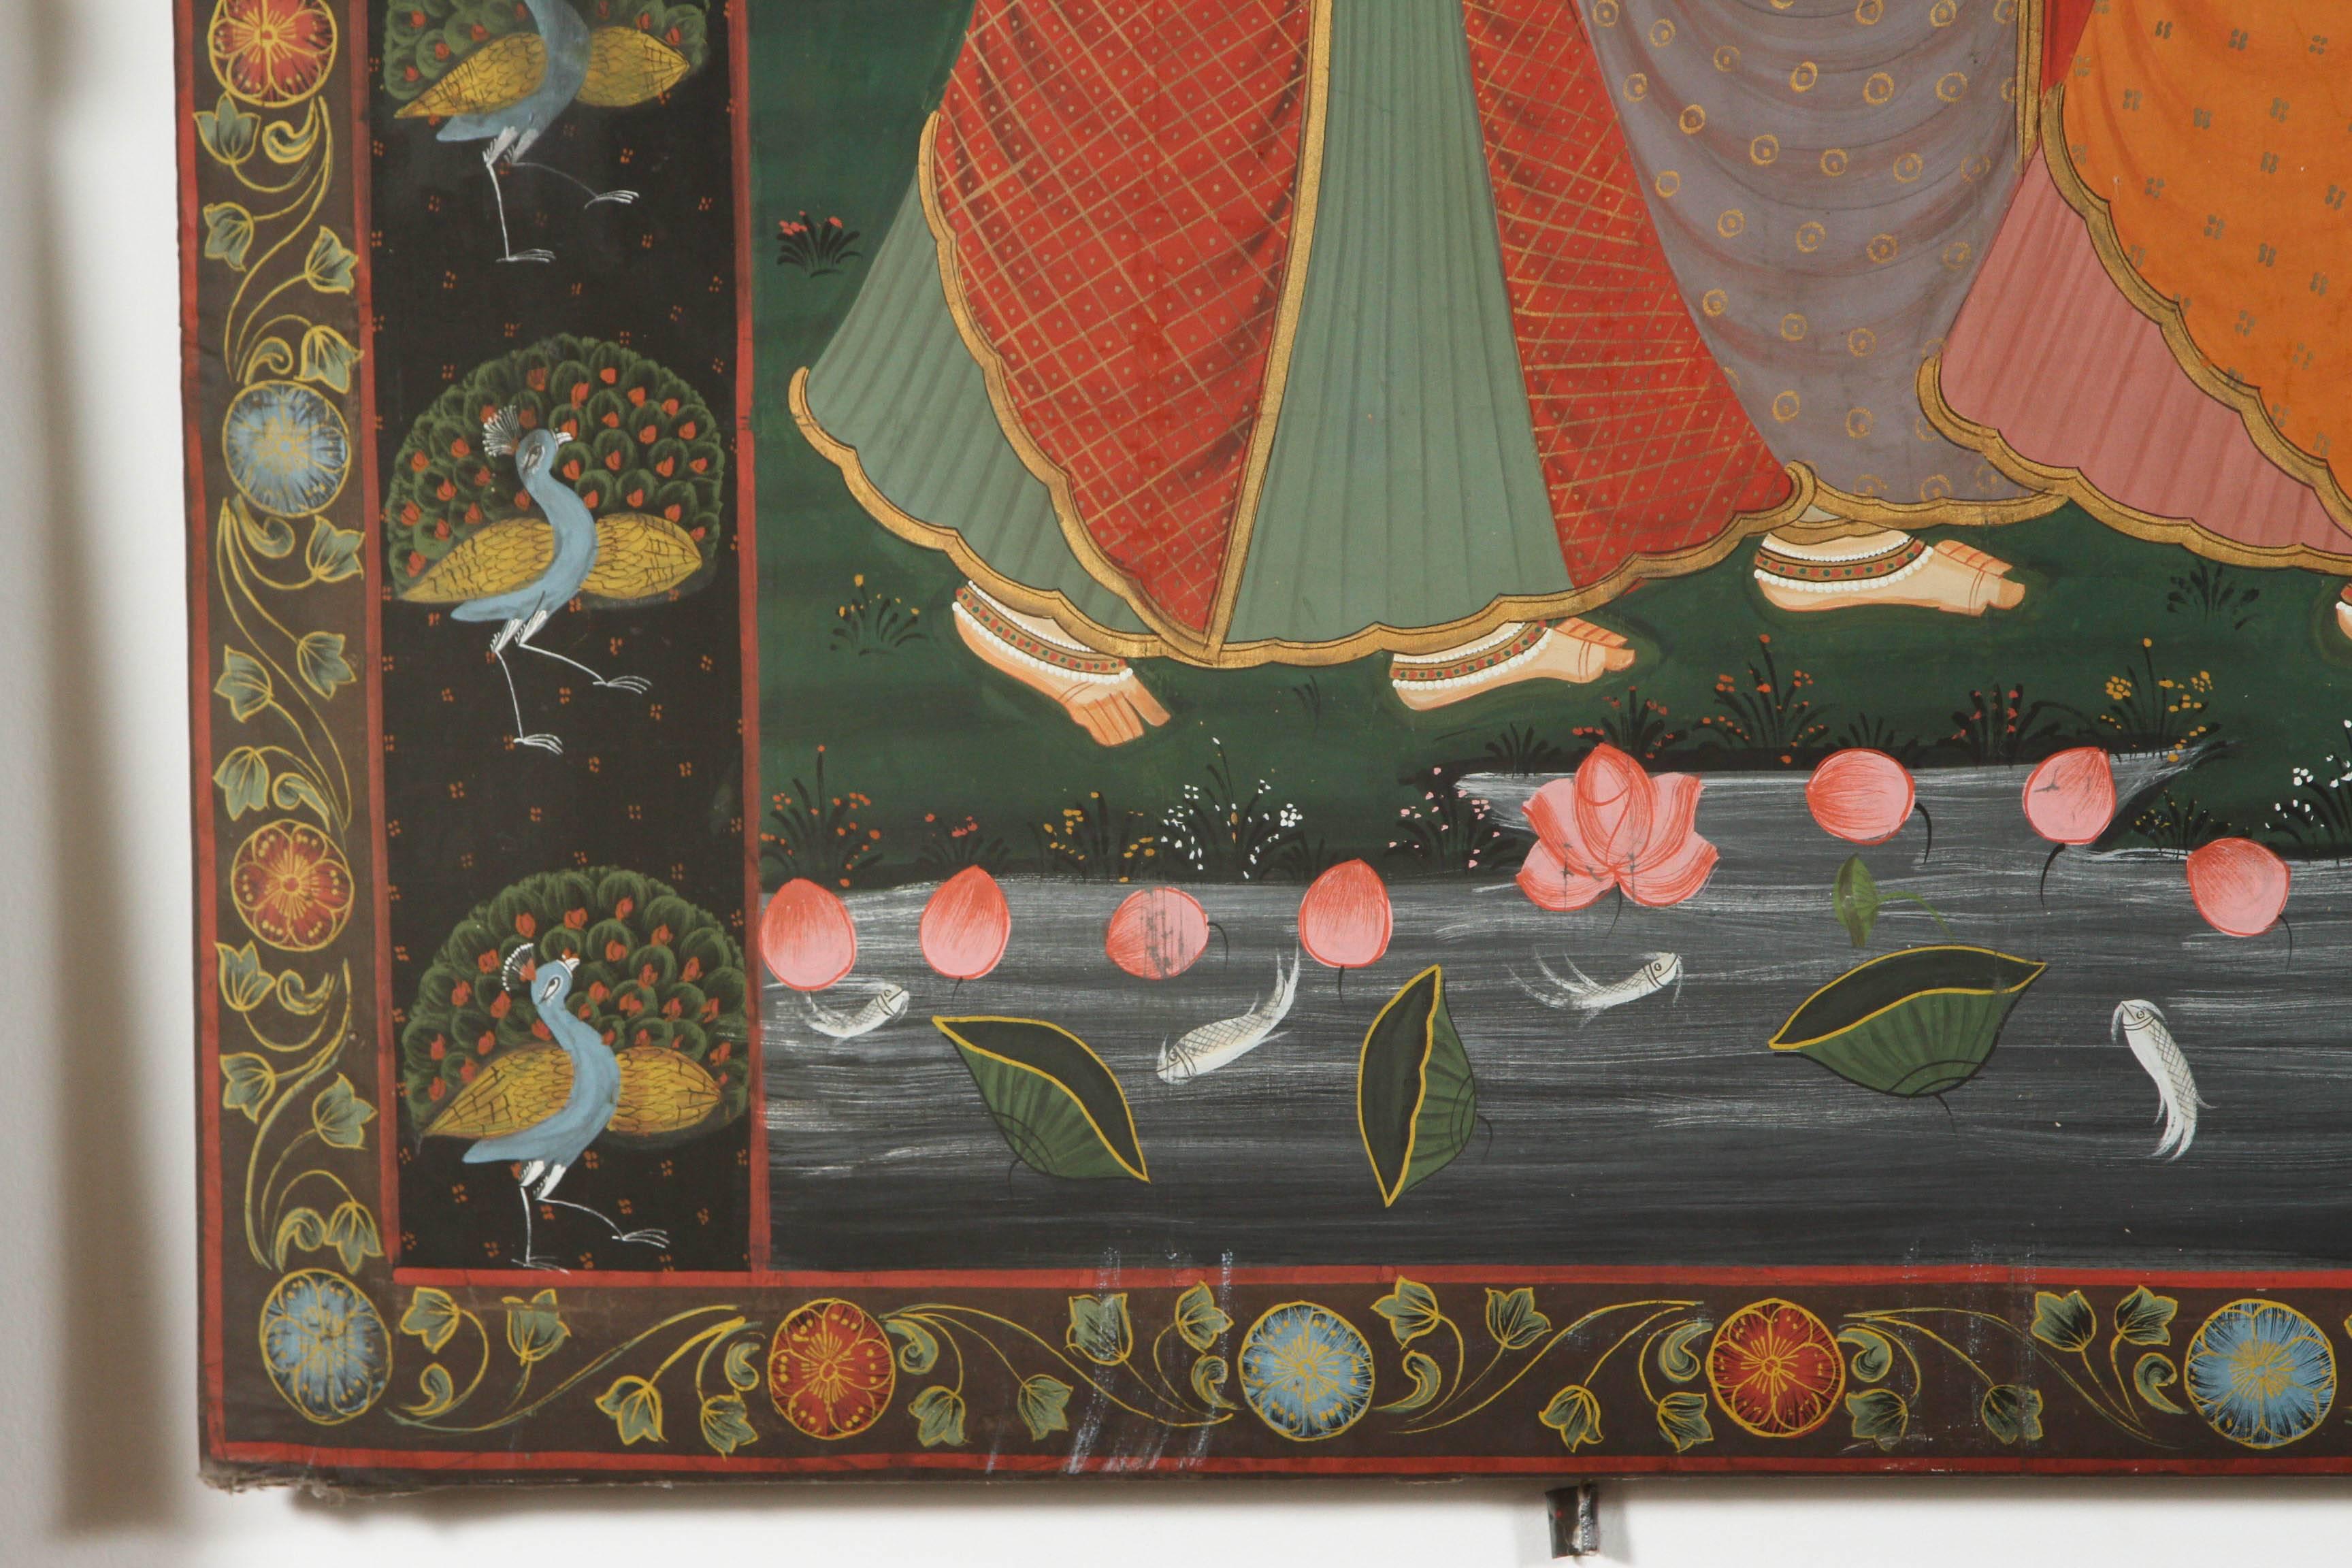 A large Pichhavai painting of Krishna with female Gopis dancing 
Krishna playing flute on a bed of lotus, the composition is enclosed in a lush green forest and the colors of the dresses play off against the vegetative forms, adding a lively pattern